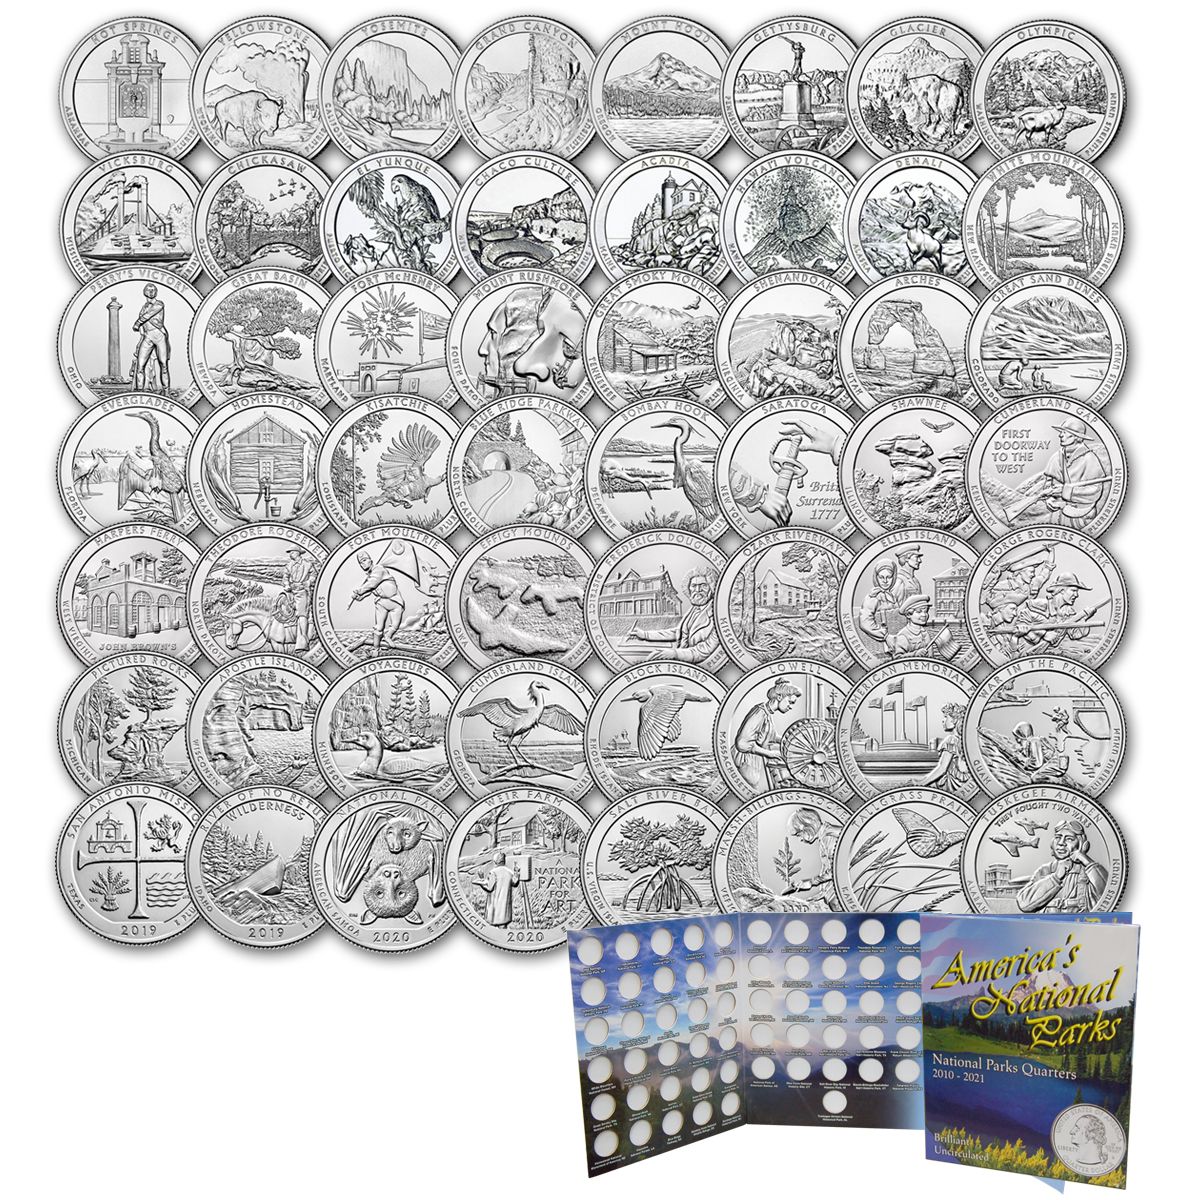 COMPLETE 10 COIN YEAR SET 2016 D & P Mint  America the Beautiful Quarters 